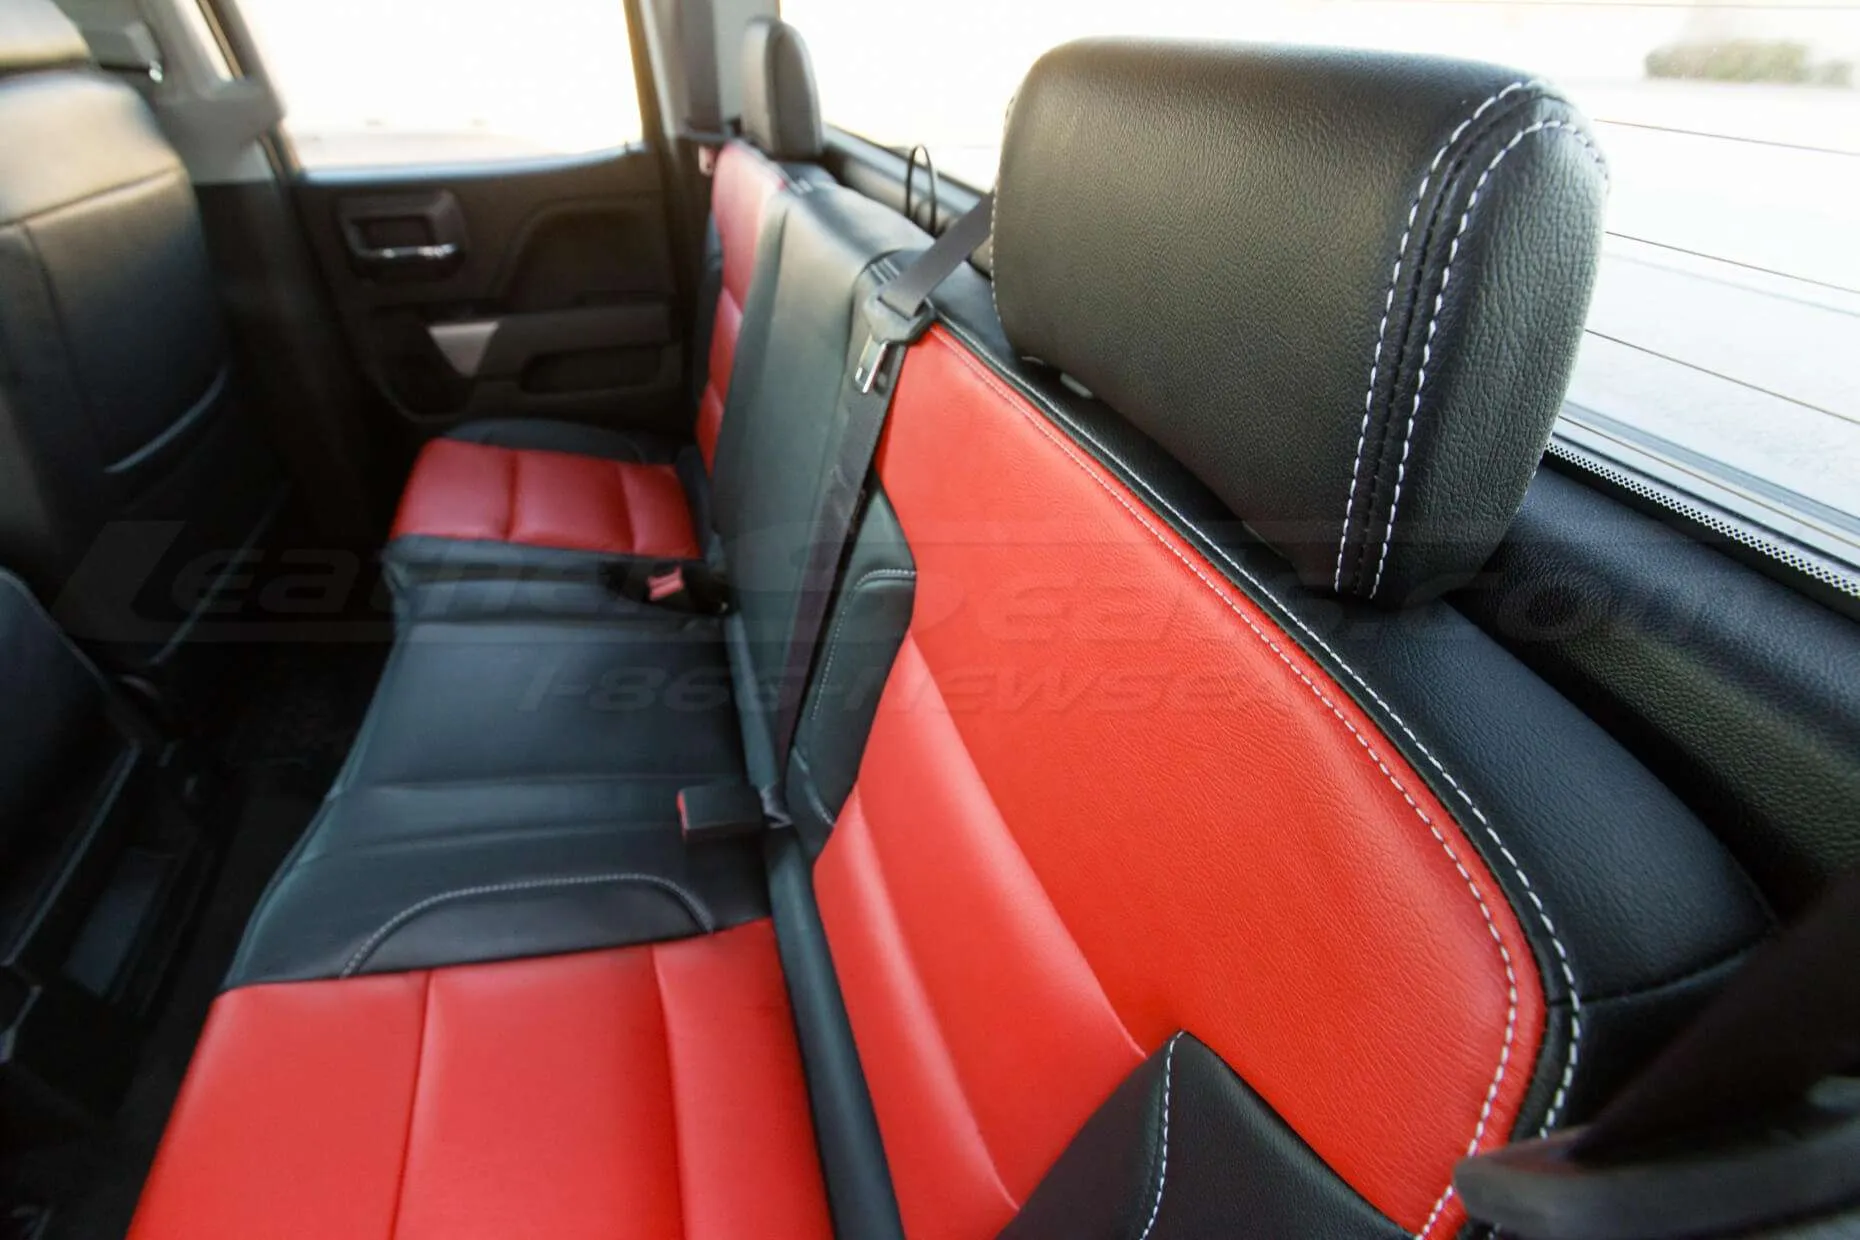 GMC Sierra leather upholstery kit - Black and Bright Red - Backseat headrest close-up